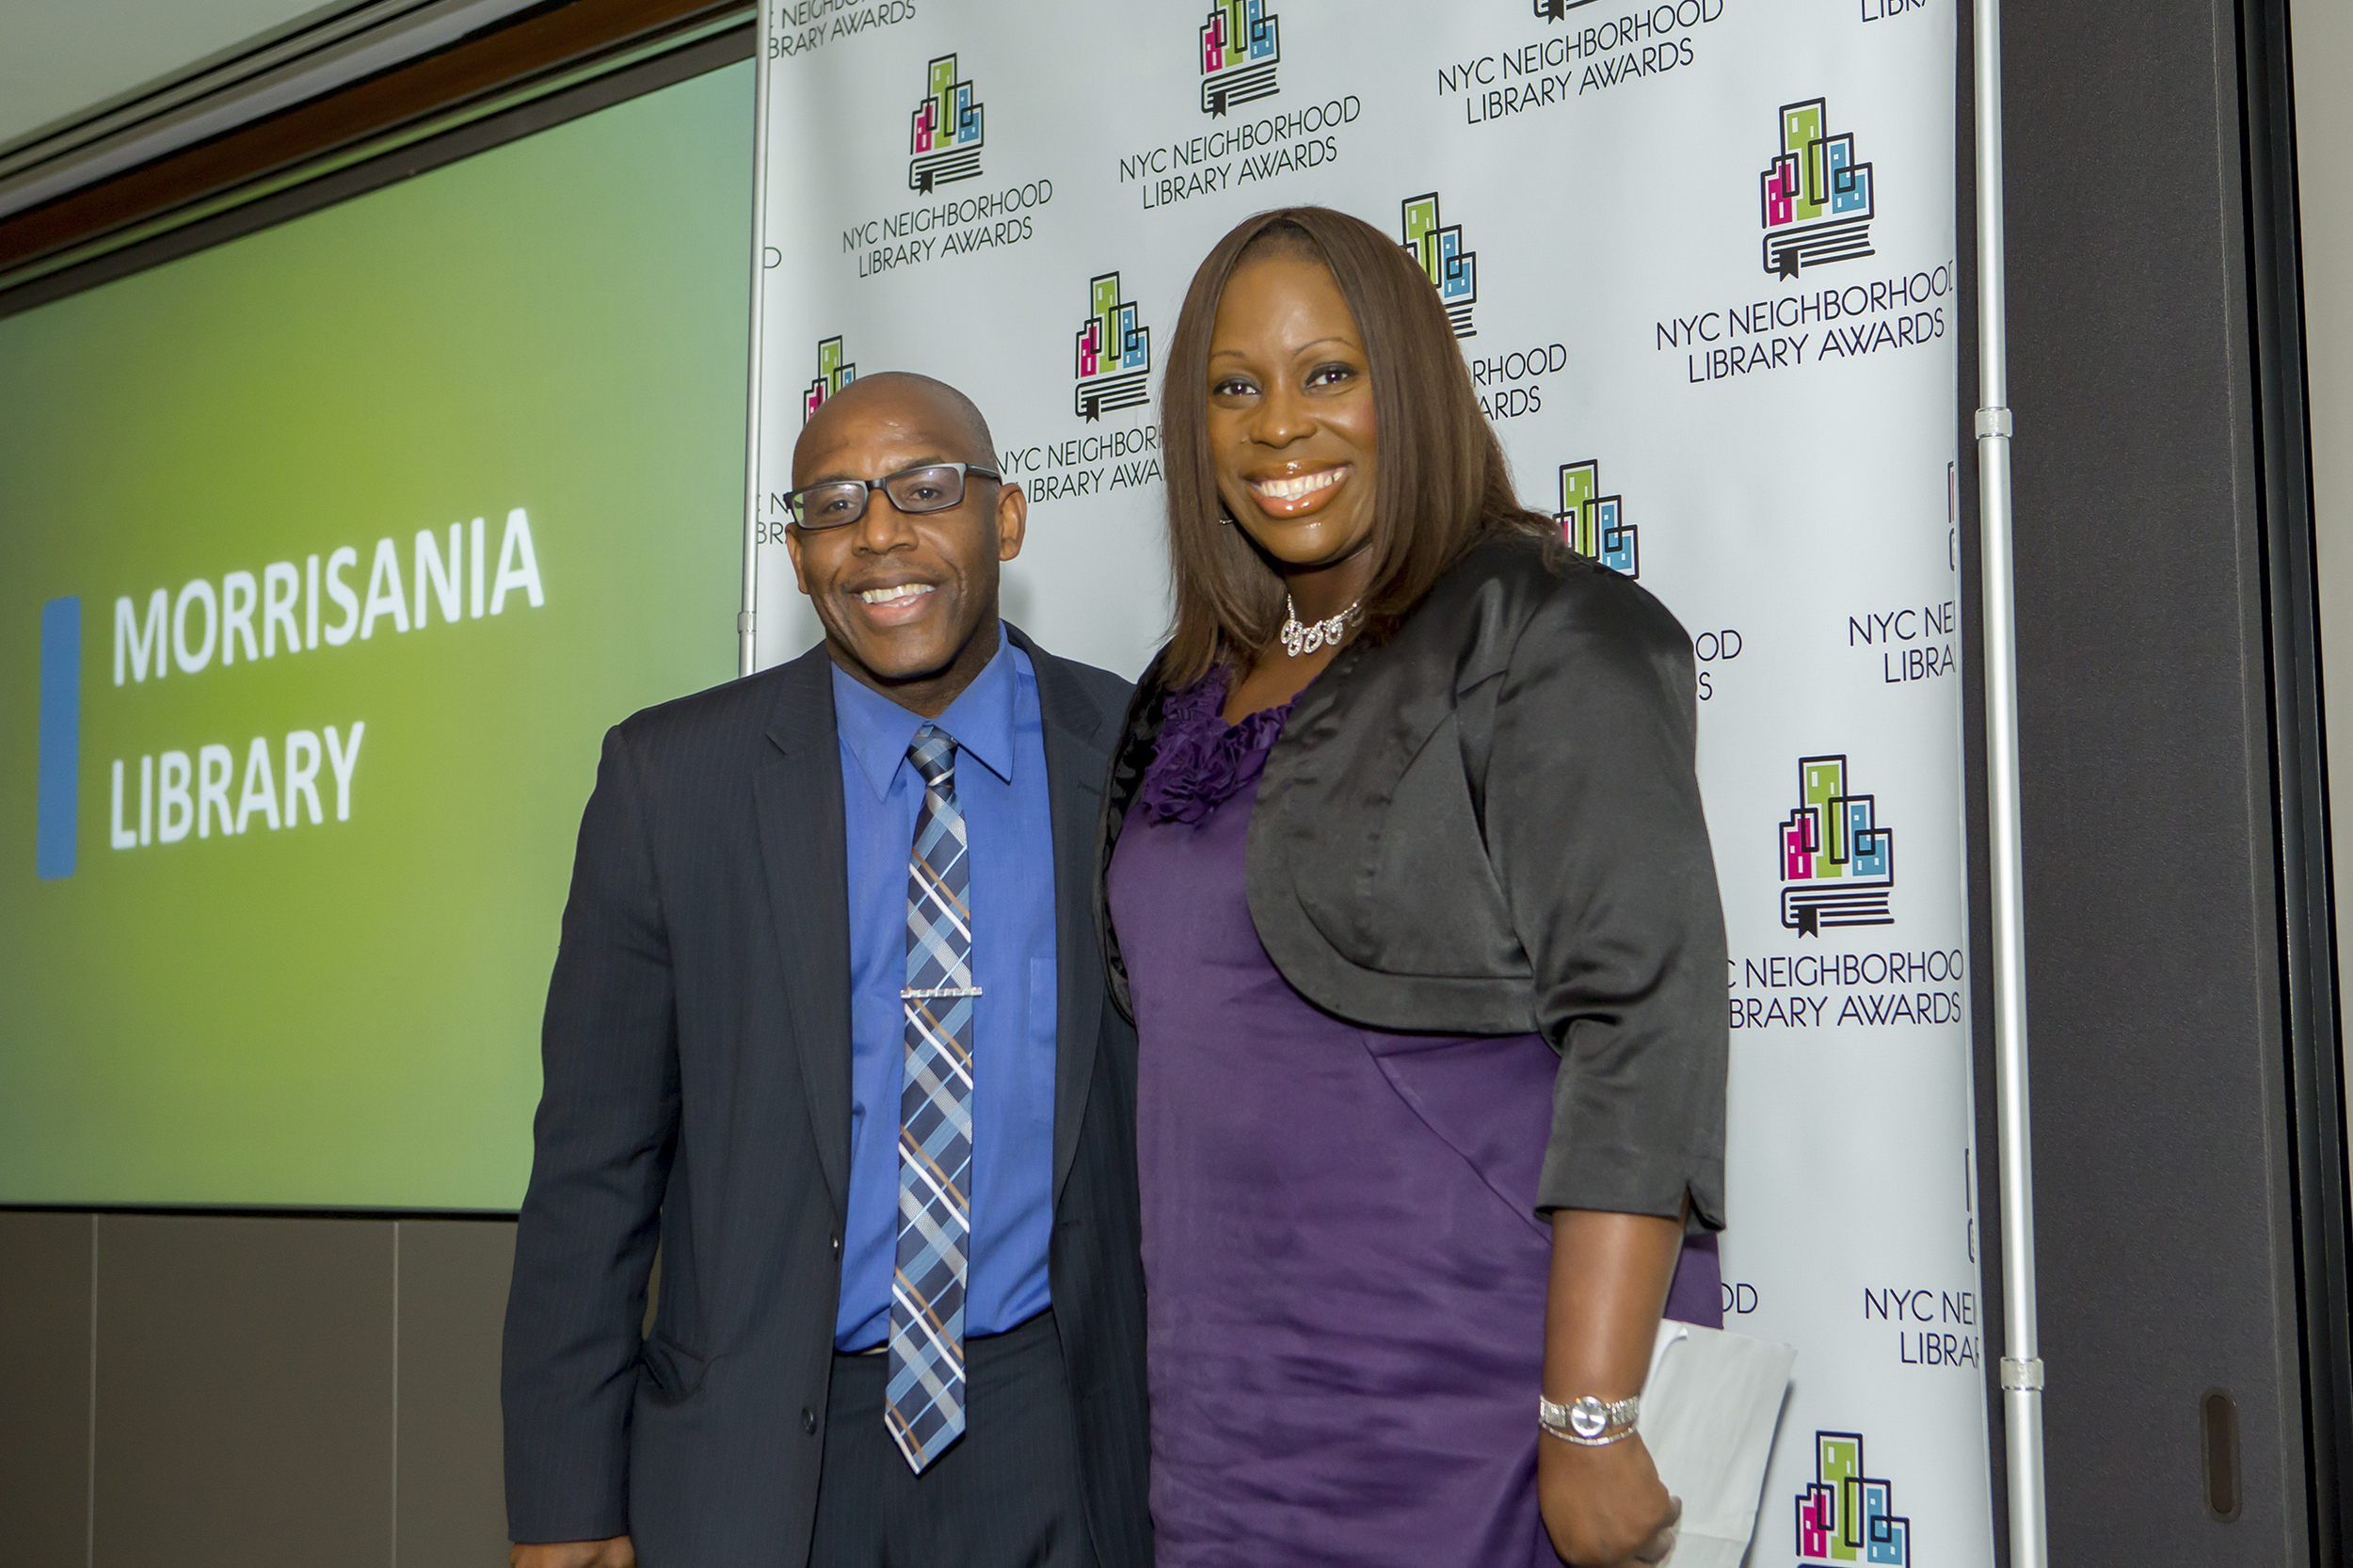 Council Member Vanessa Gibson and Colbert Nembhard, Manager of the Morrisania Library